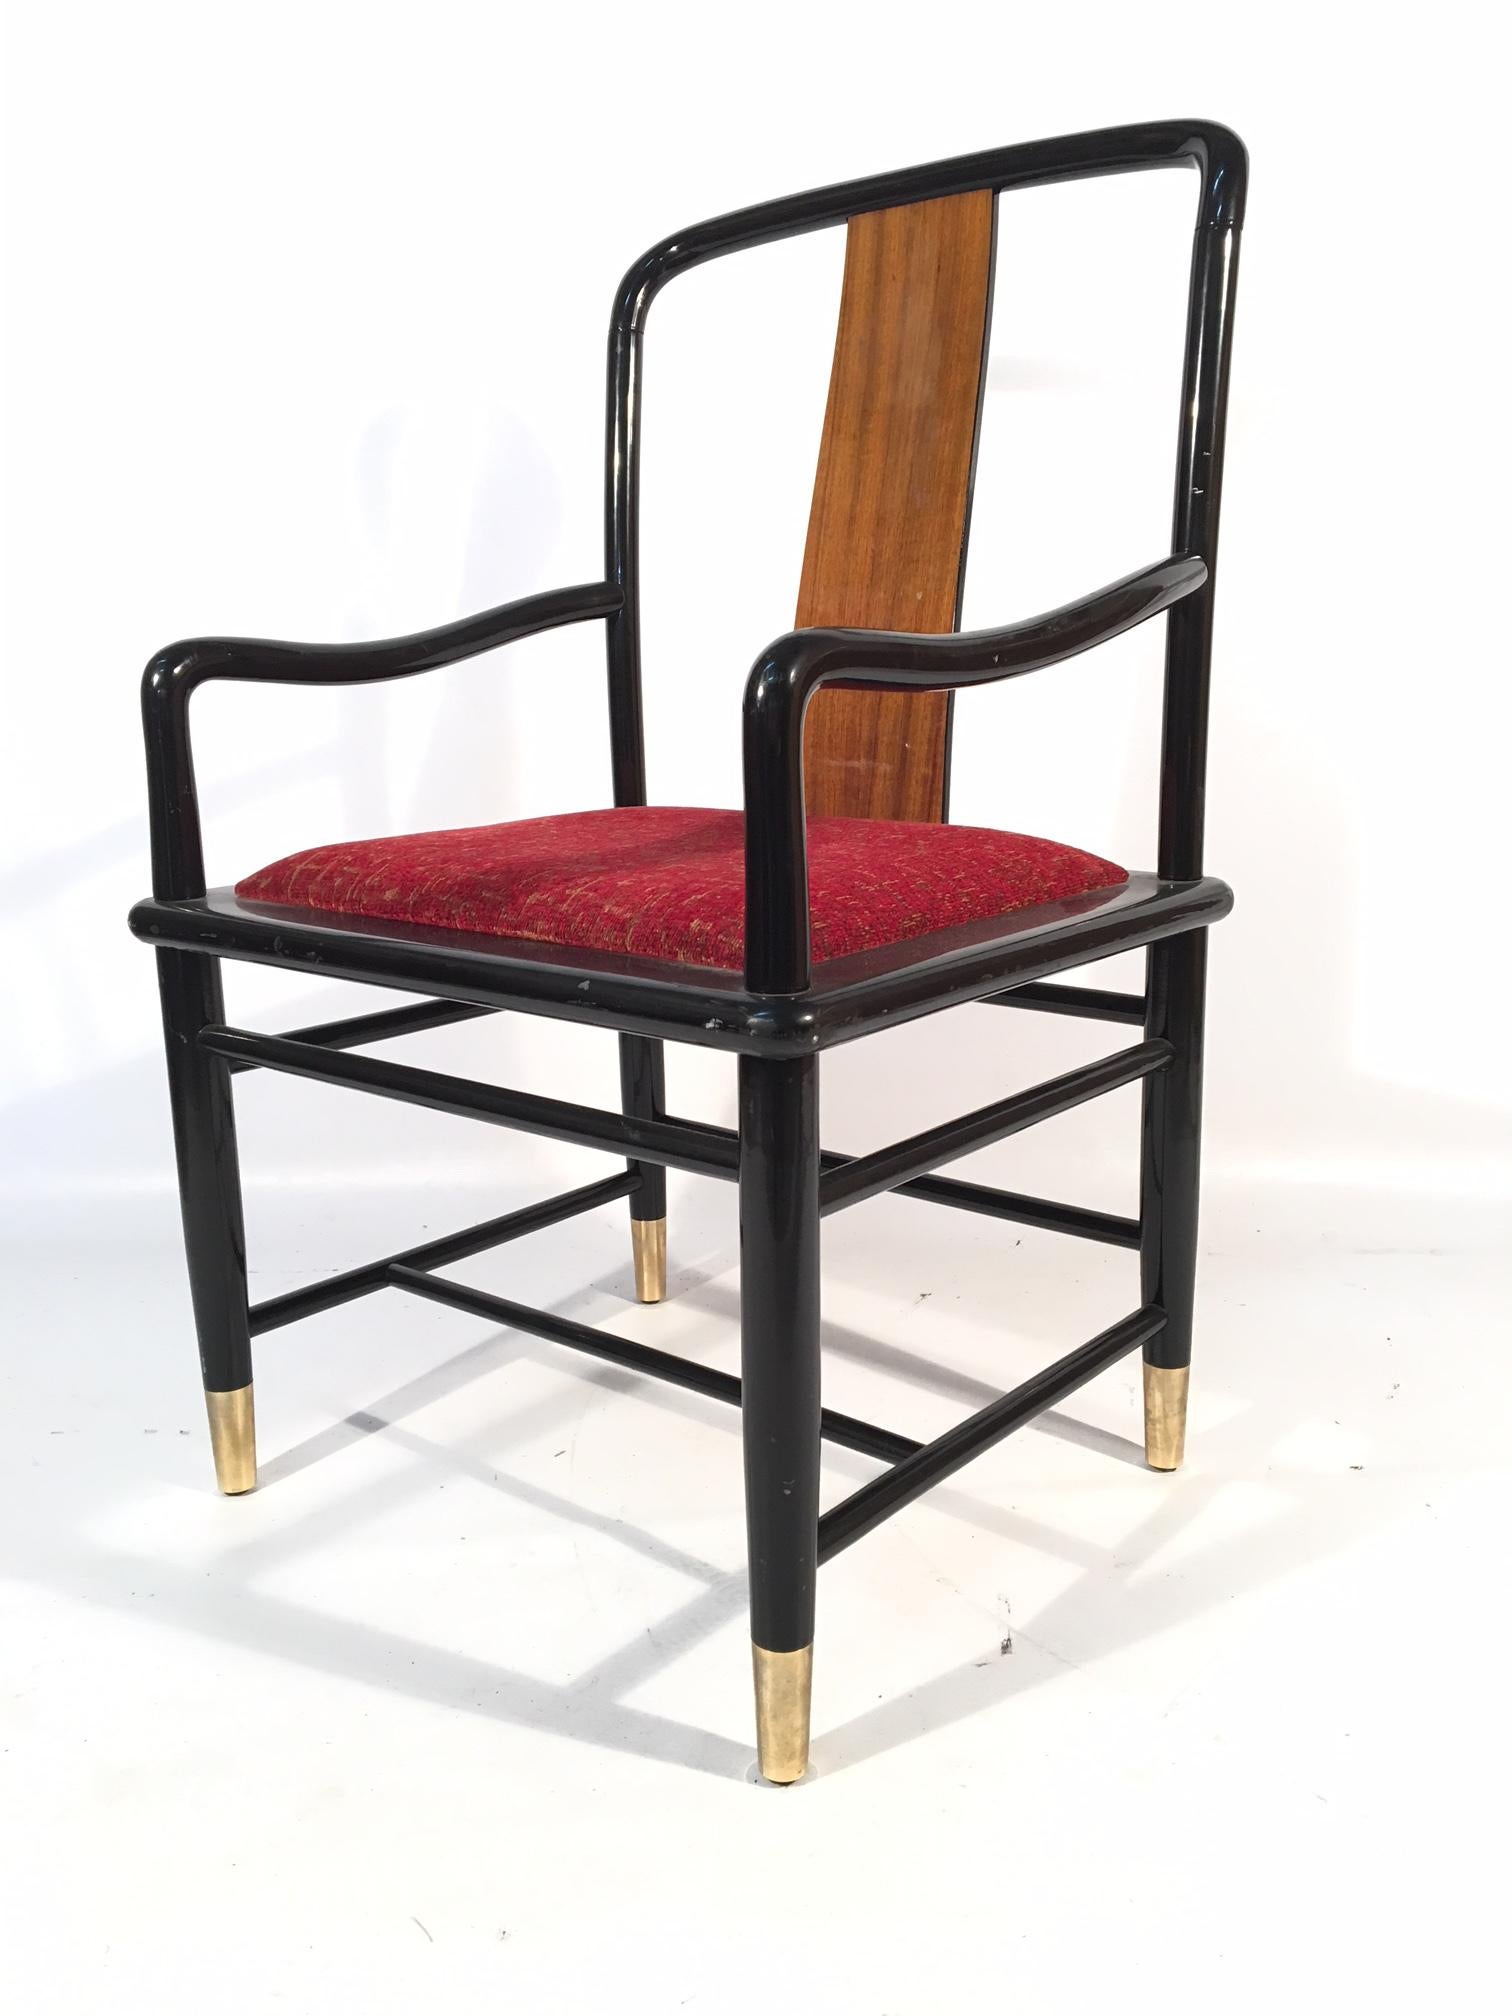 Set of six Henredon Elan dining chairs feature black lacquered frames, brass feet, and koa wood back splats. Very good vintage condition with only very minor signs of age appropriate wear.
Measures: Side chairs measure 20.5